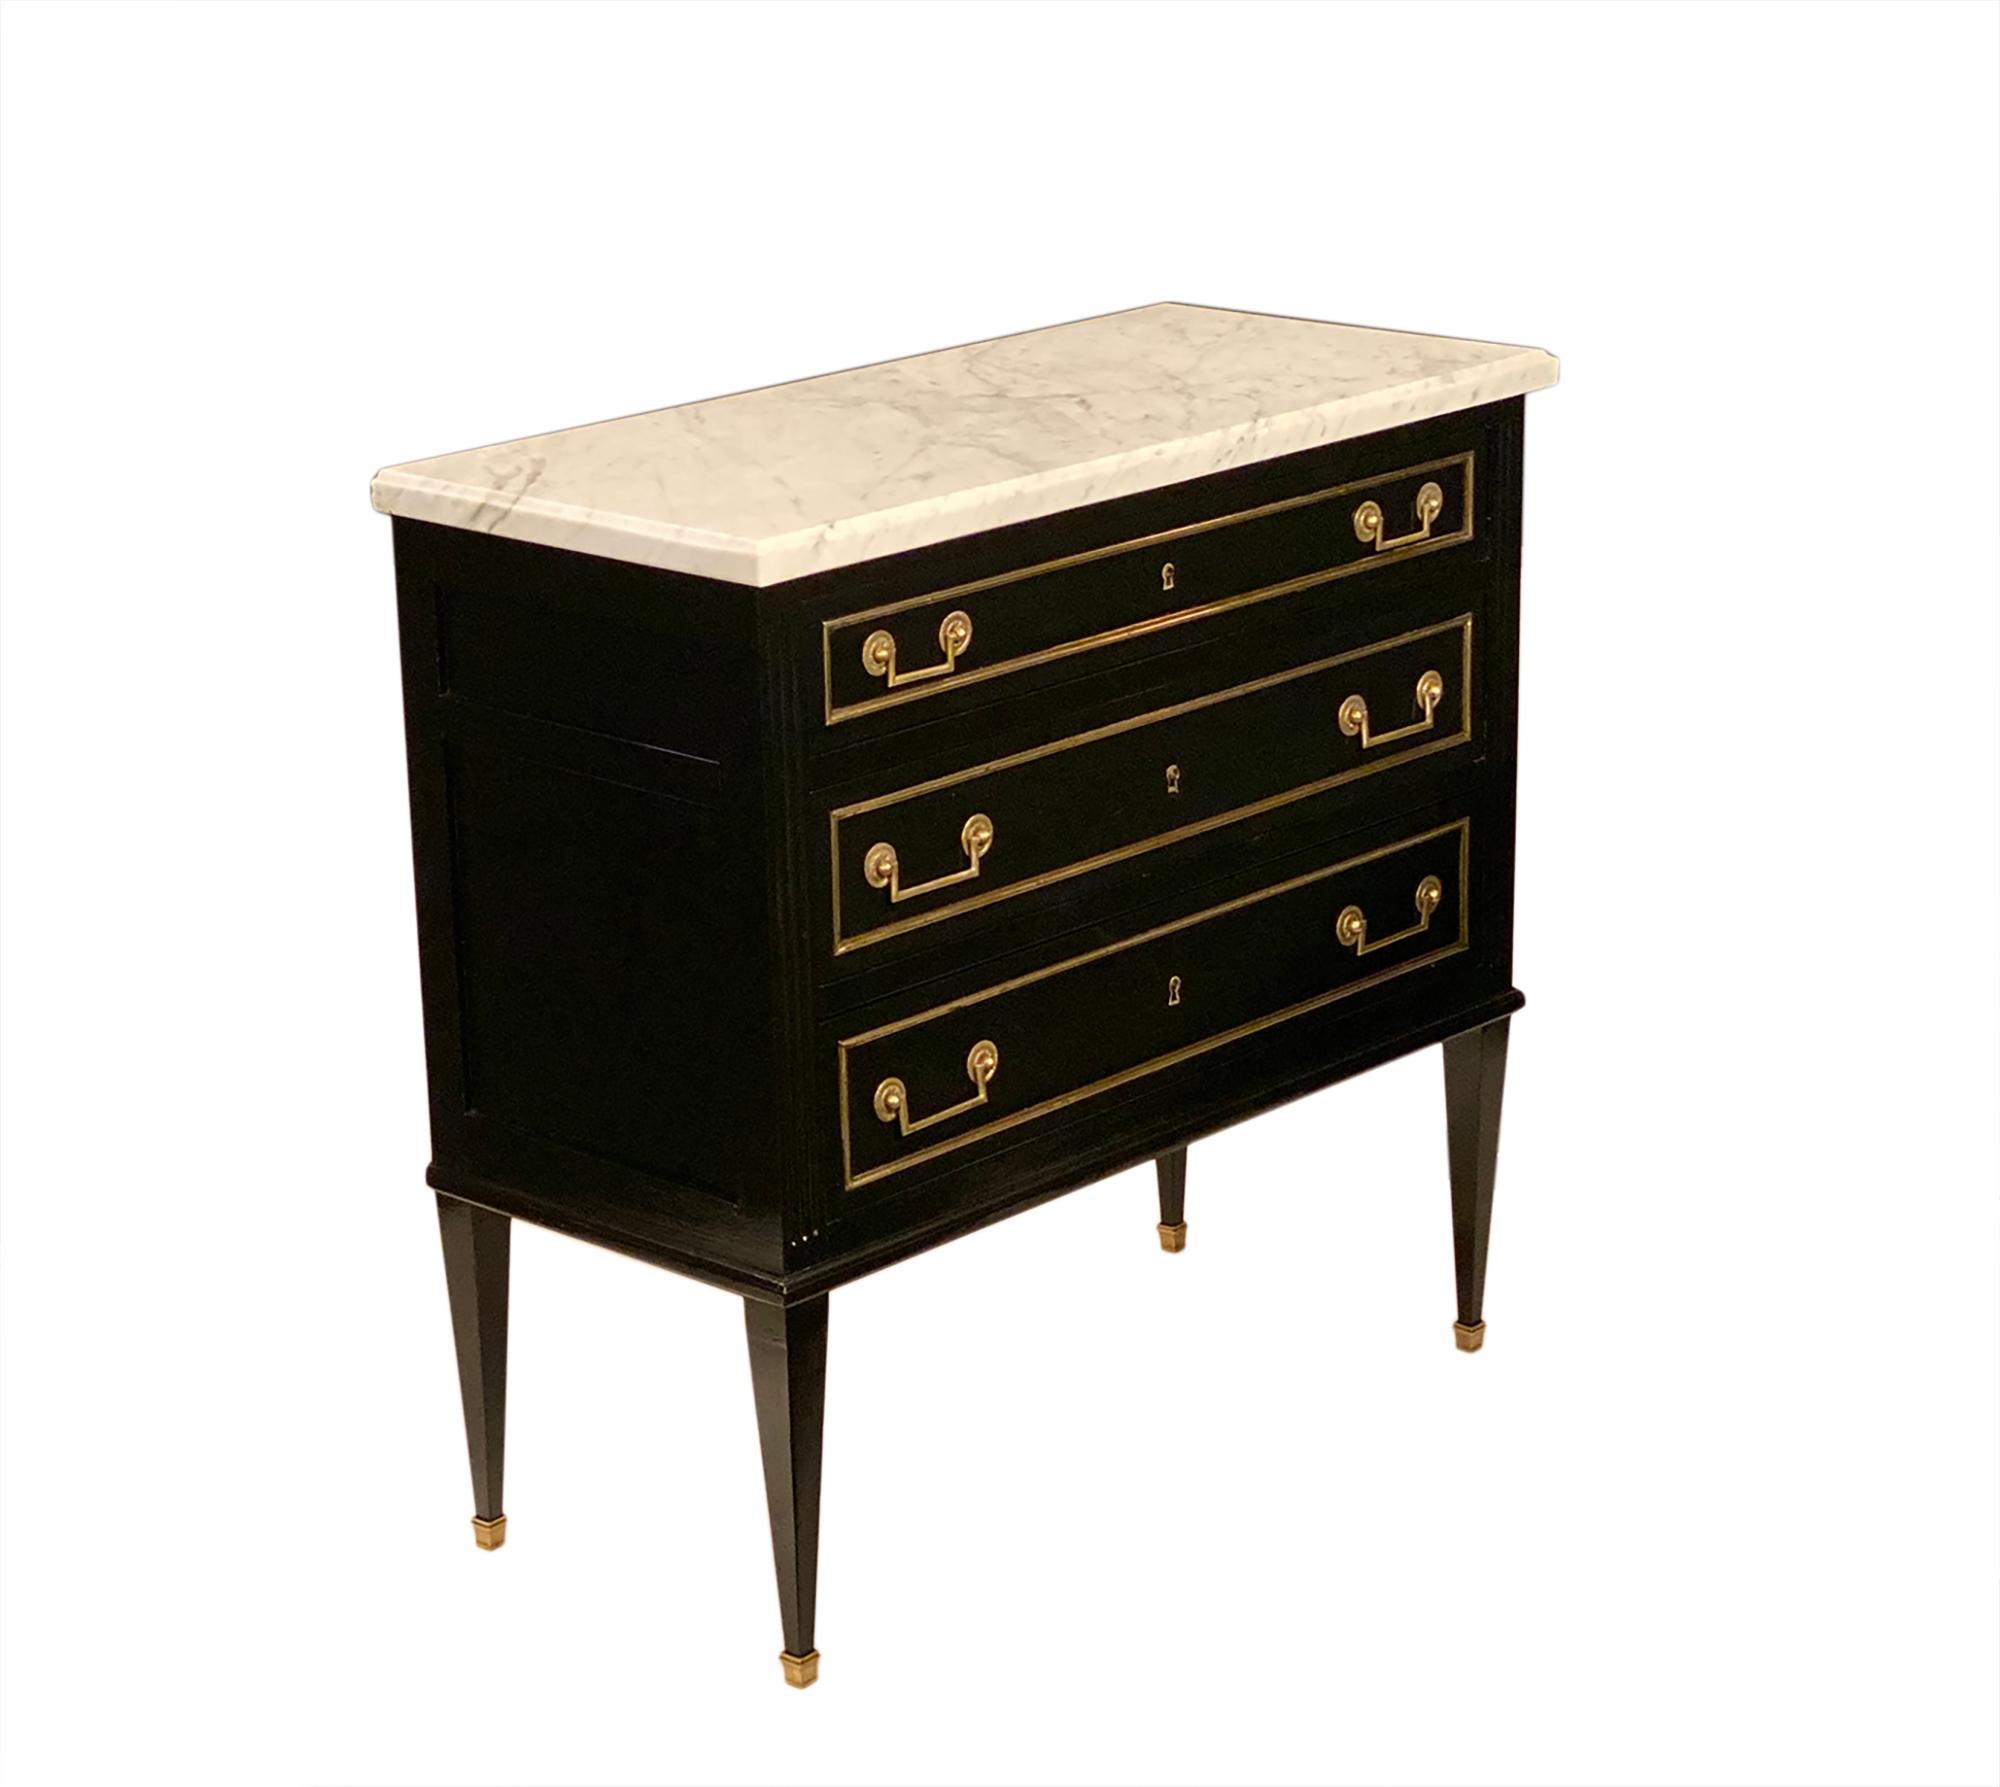 Louis XVI style Carrara topped chest. This lovely “commode sauteuse” from France is made of mahogany that has been ebonized and finished with a French polish. We love the gilt brass hardware and trim on all three dovetailed drawers. The long tapered